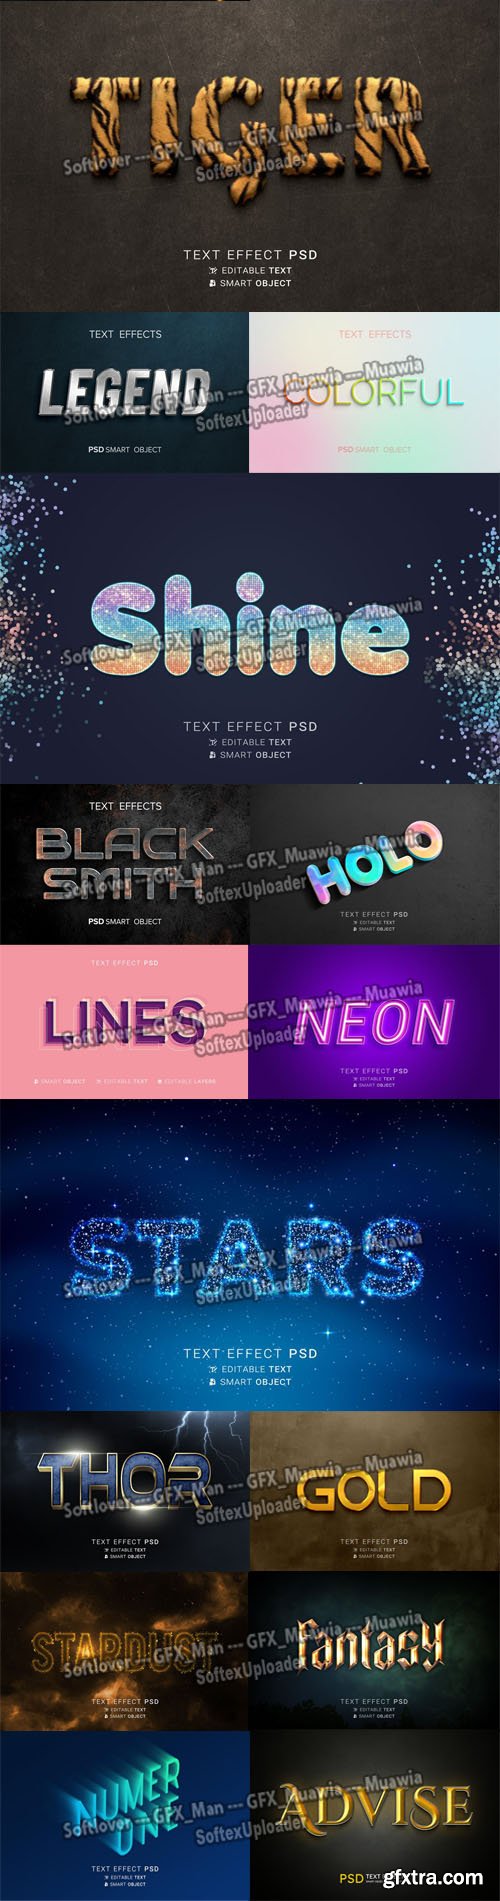 30+ Creative & Modern Text Effects in Photoshop